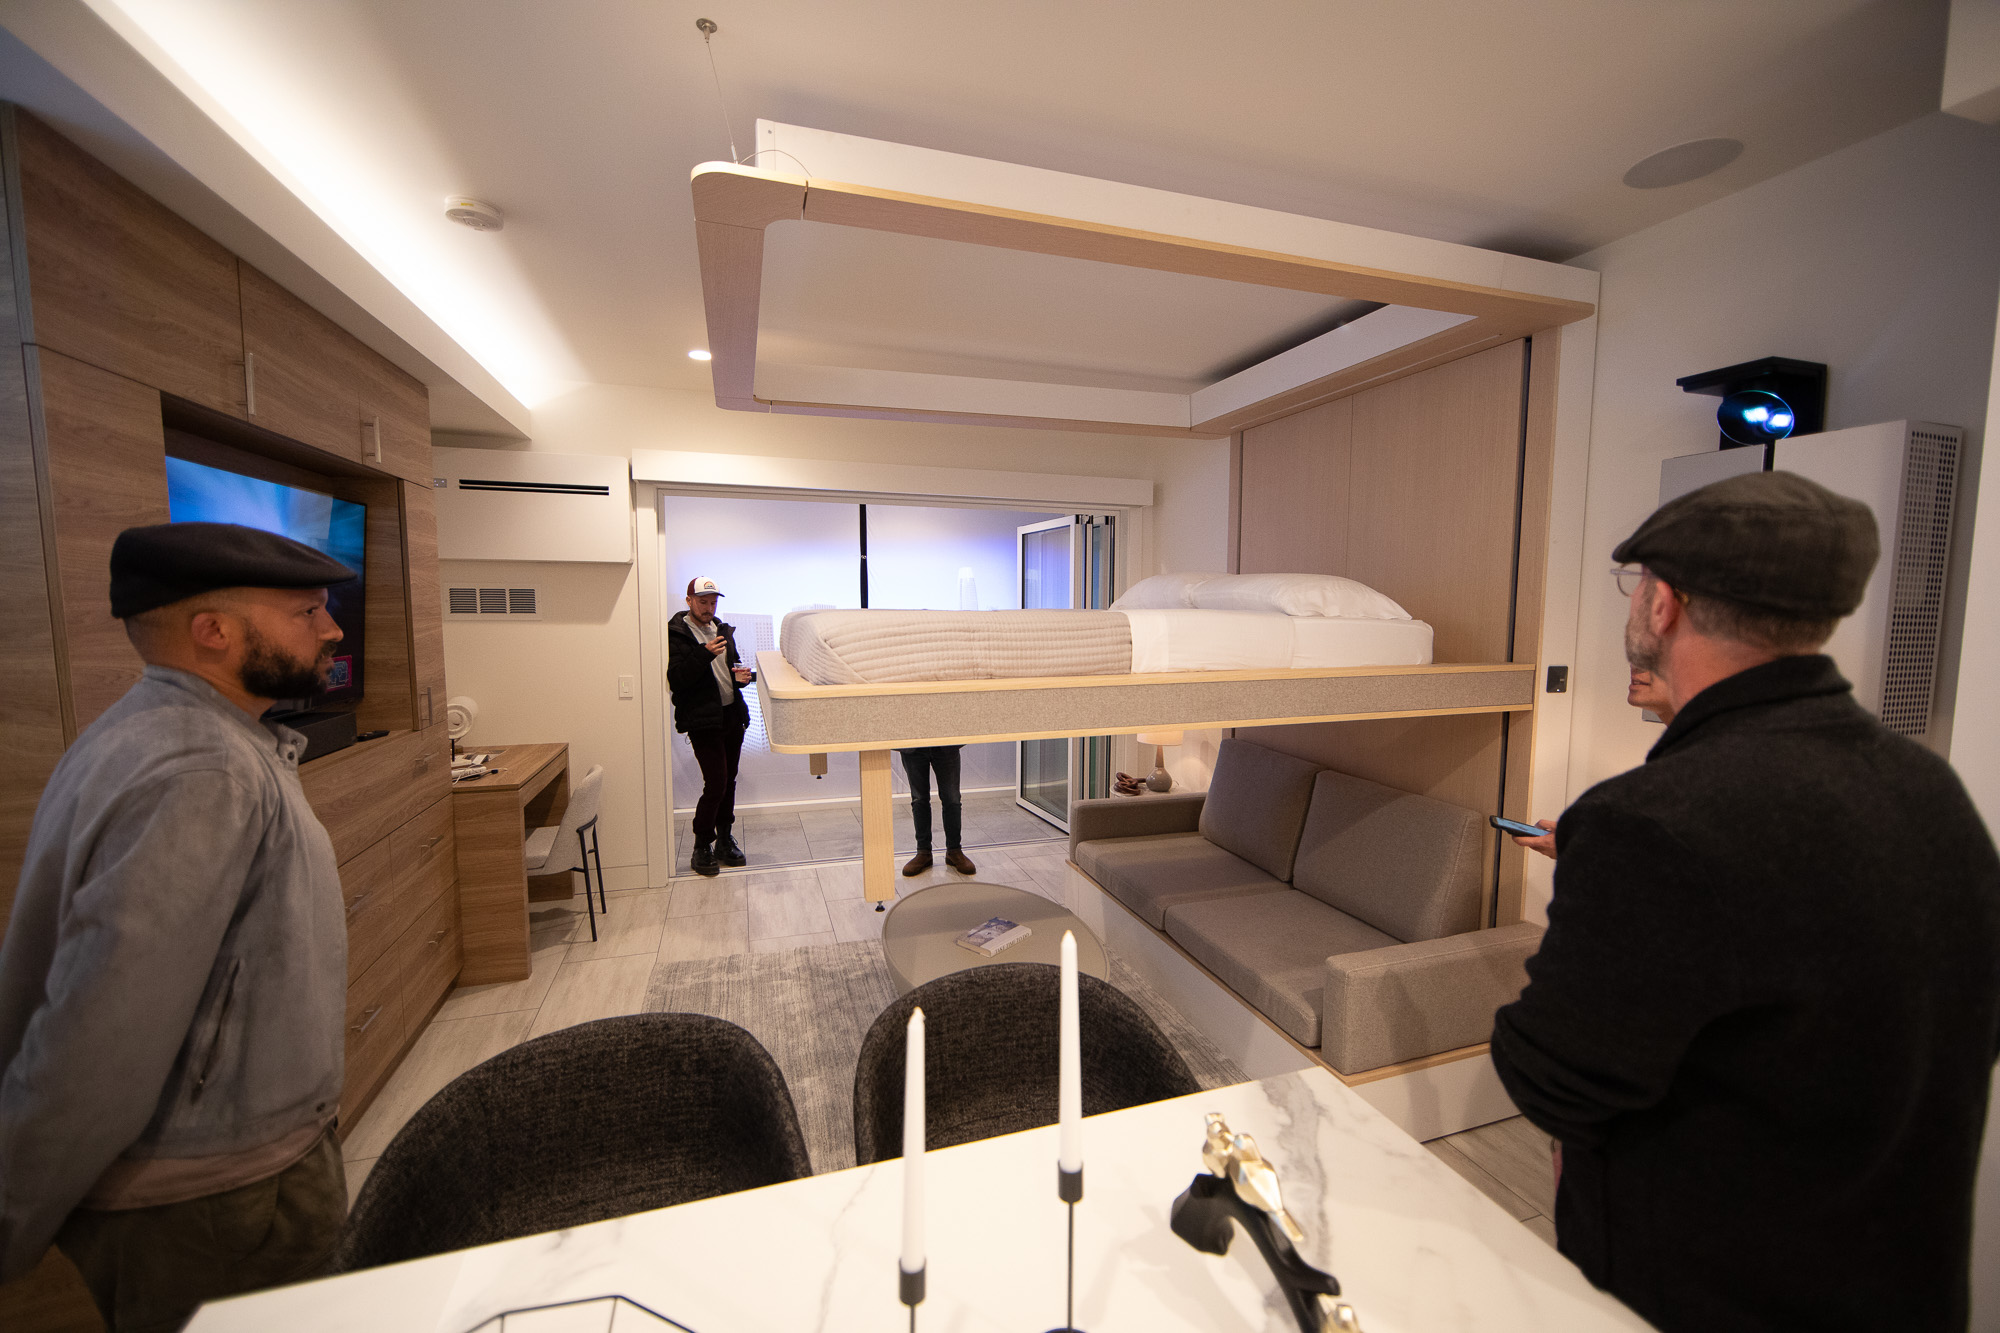 Cloud S modular apartment prototype bed lowering from ceiling